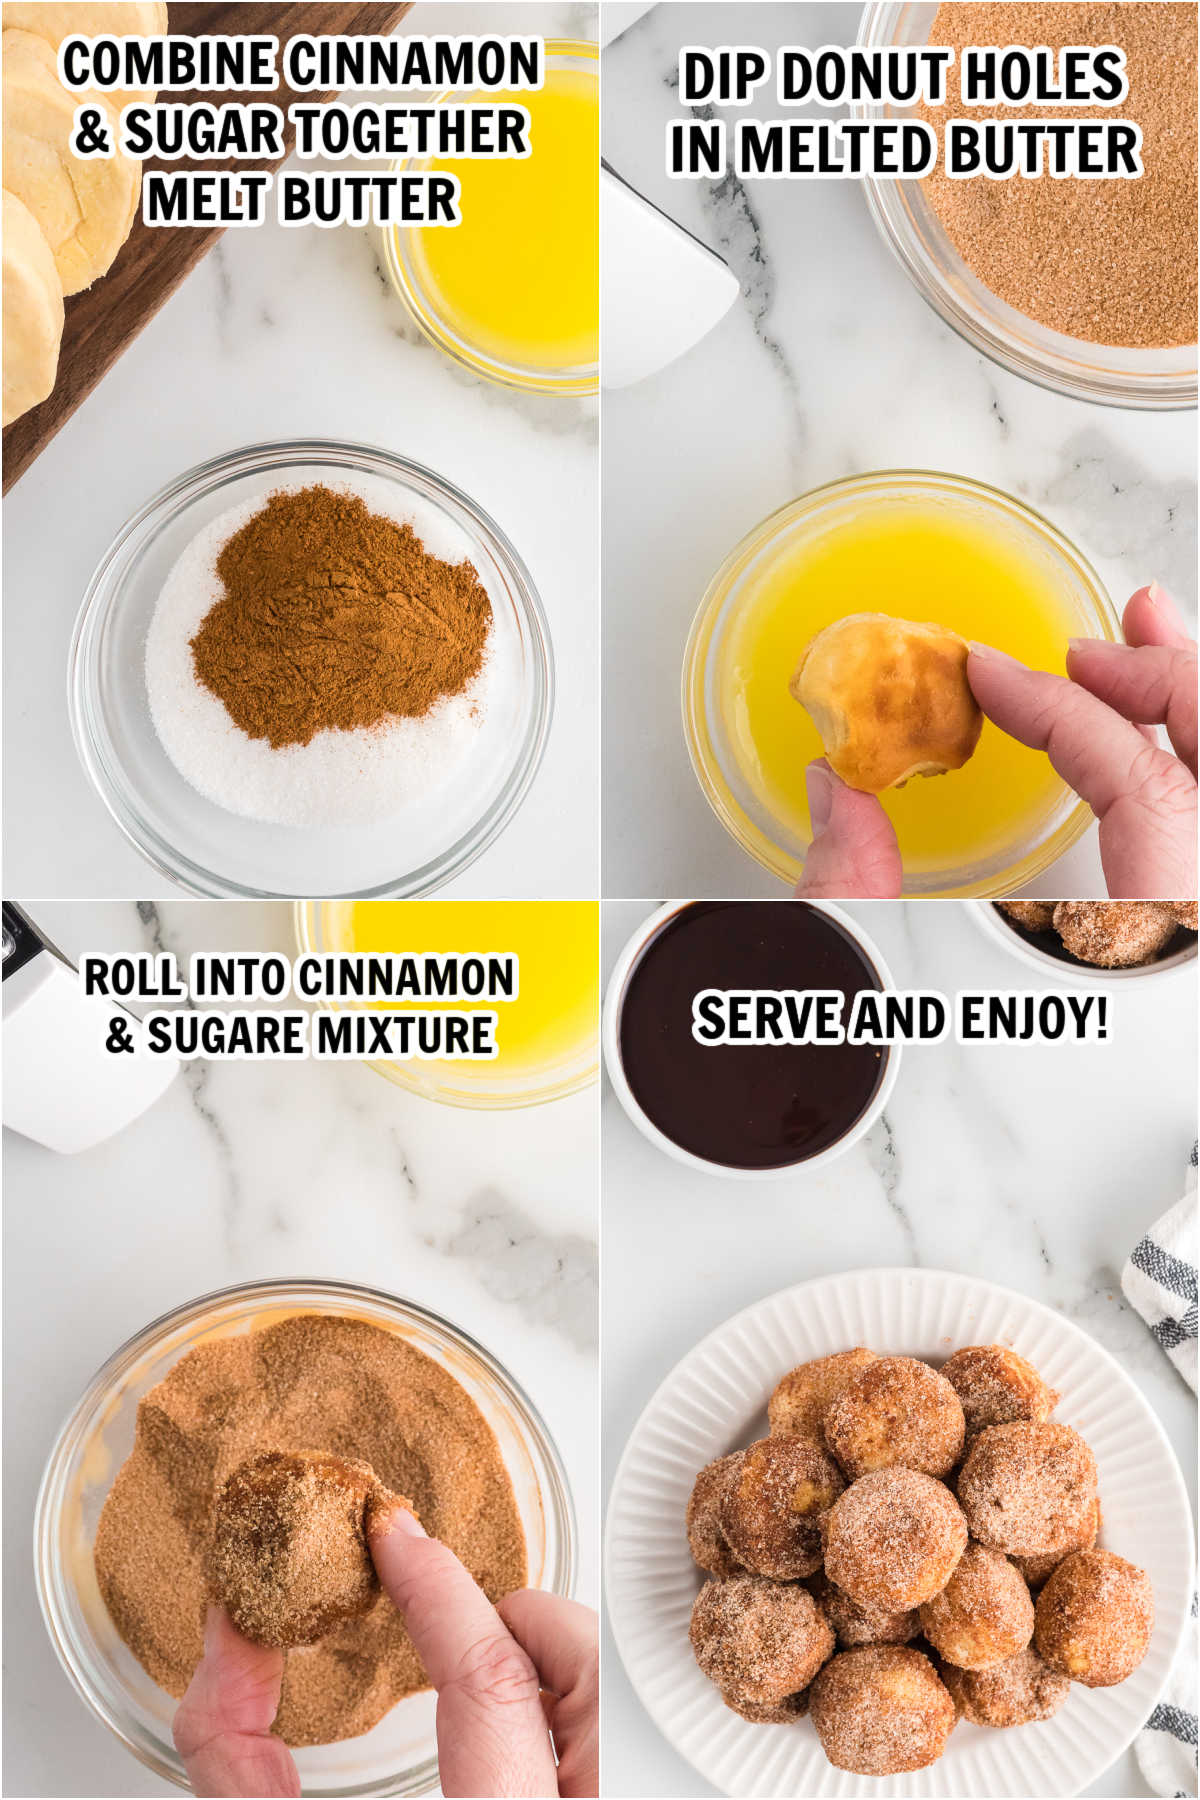 The process of mixing the cinnamon and sugar together. Dipping the donut hole in the melted butter and then rolling into the mixture